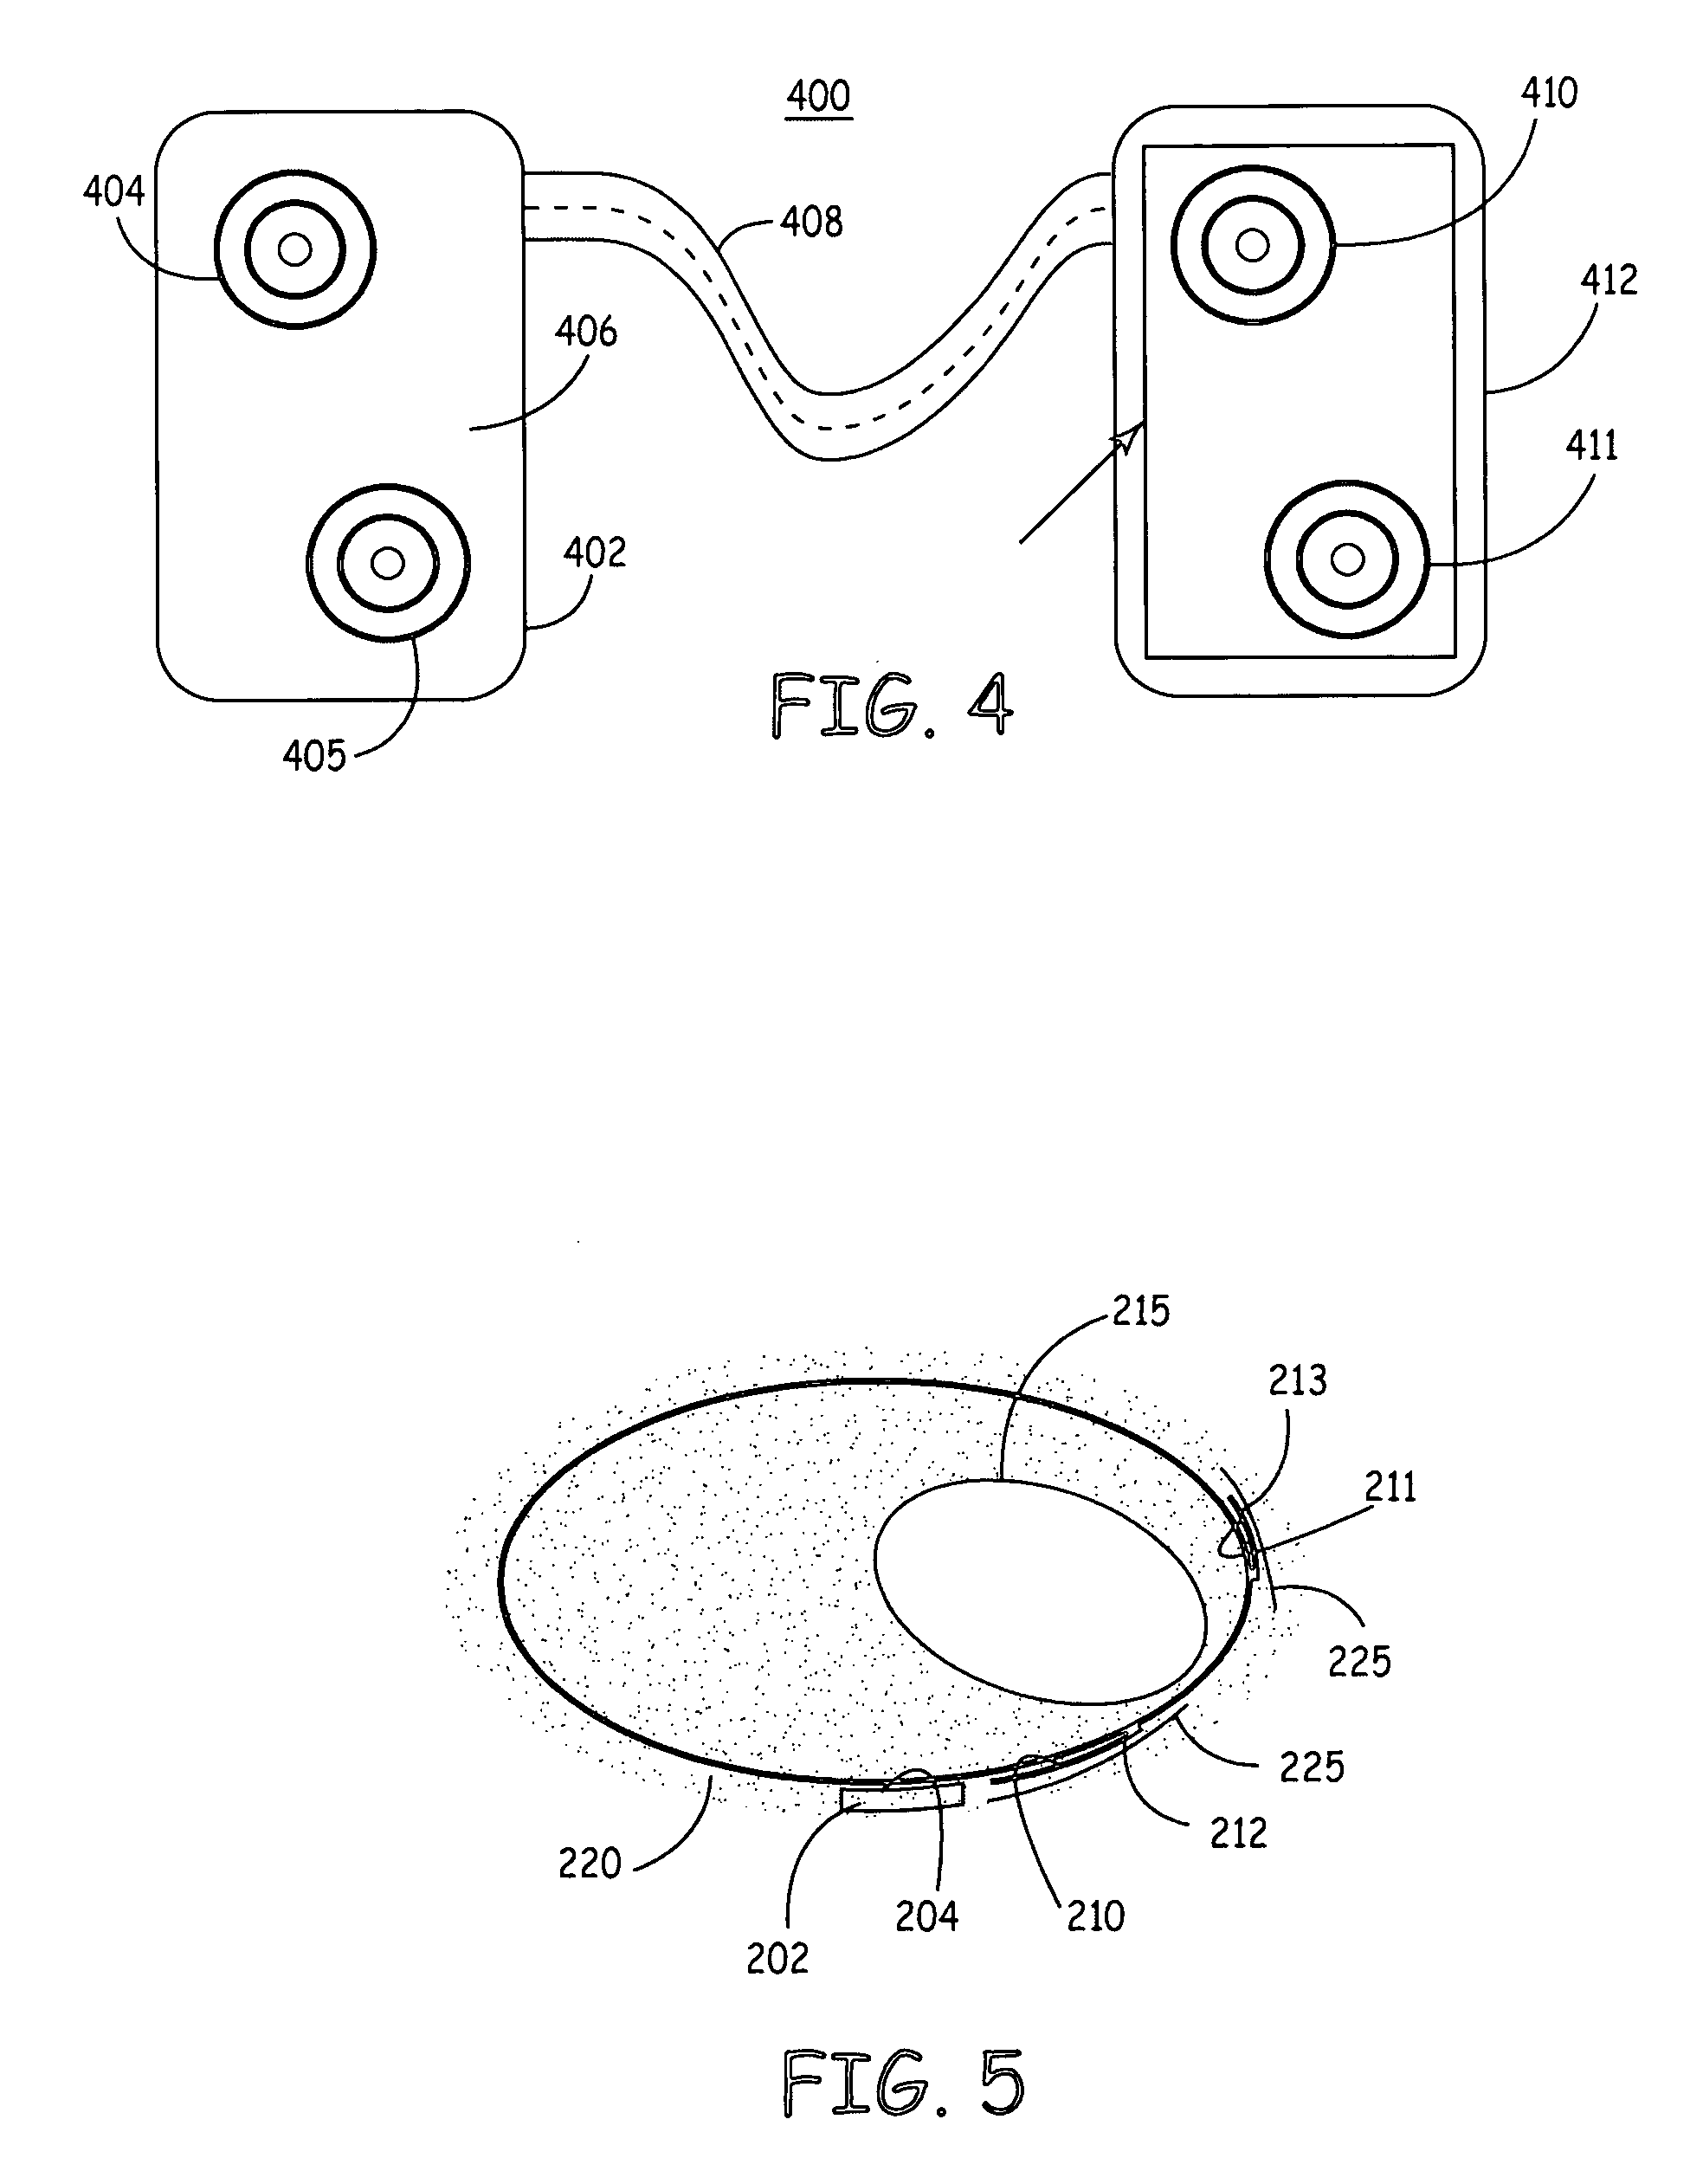 Method and apparatus for arrhythmia detection in a medical device